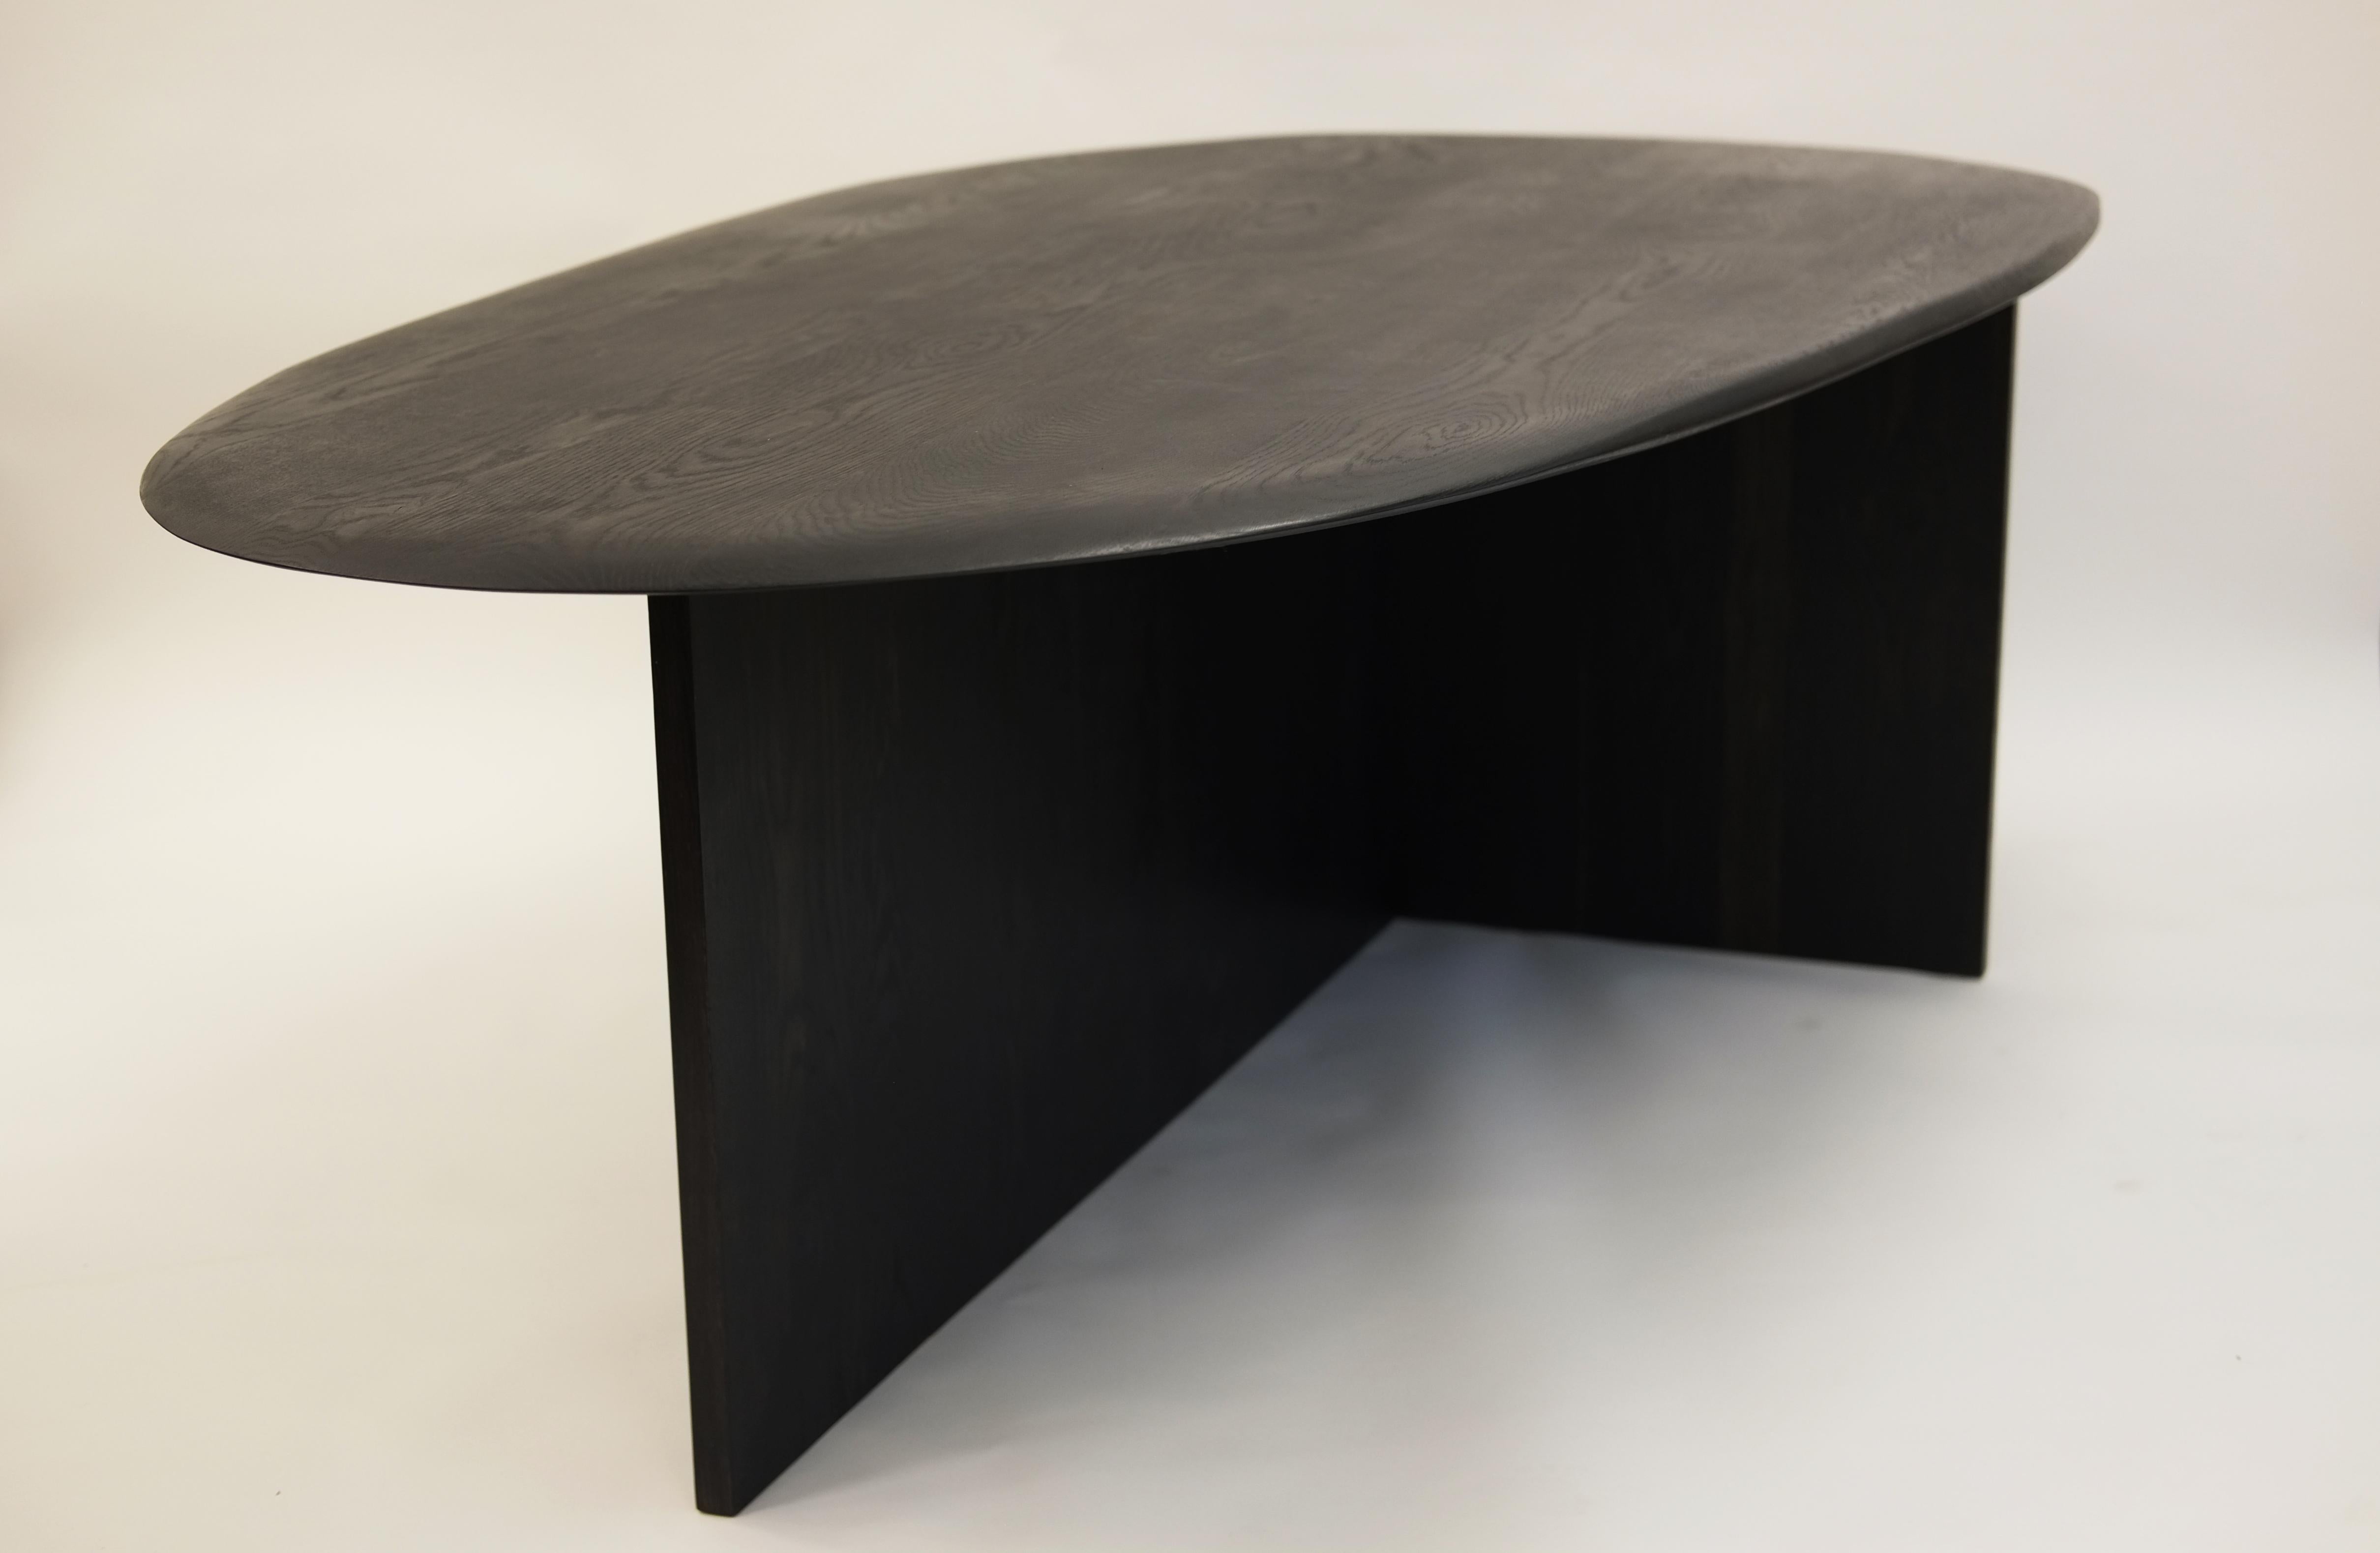 Pebble table by Fred Rigby Studio
Dimensions: L 240 x W 126 x H 74 cm
Materials: Solid oak, Naturally Ebonised


Fred Rigby Studio is a London-based furniture and interior design practice founded by Fred Rigby in 2008. The independent studio